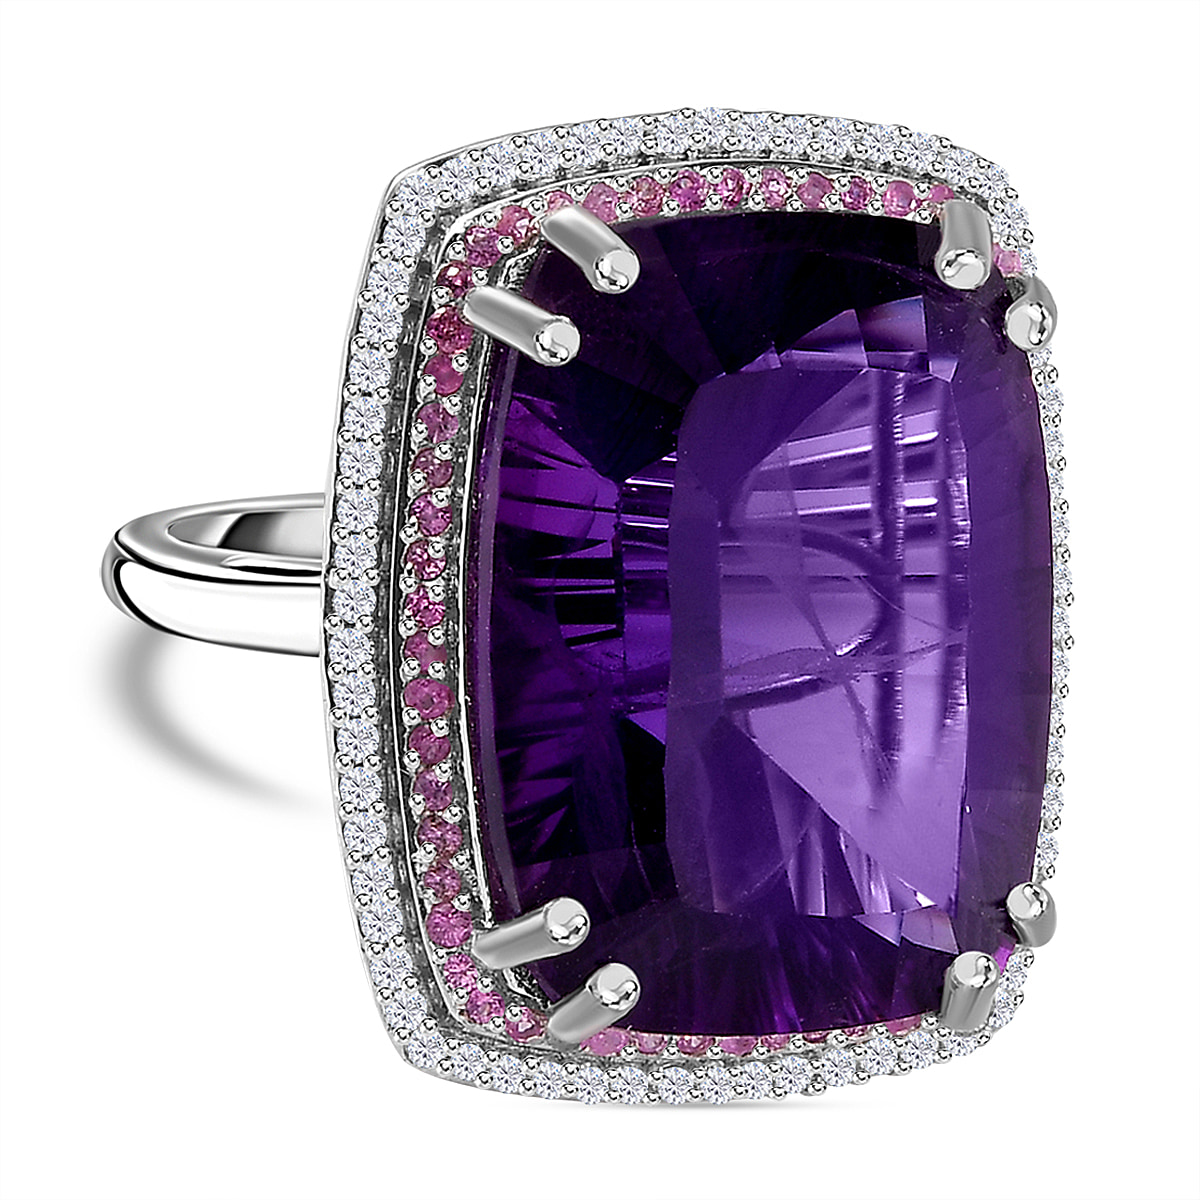 African Amethyst, Pink Sapphire, White Zircon Double Halo Ring in Platinum Overlay Sterling Silver